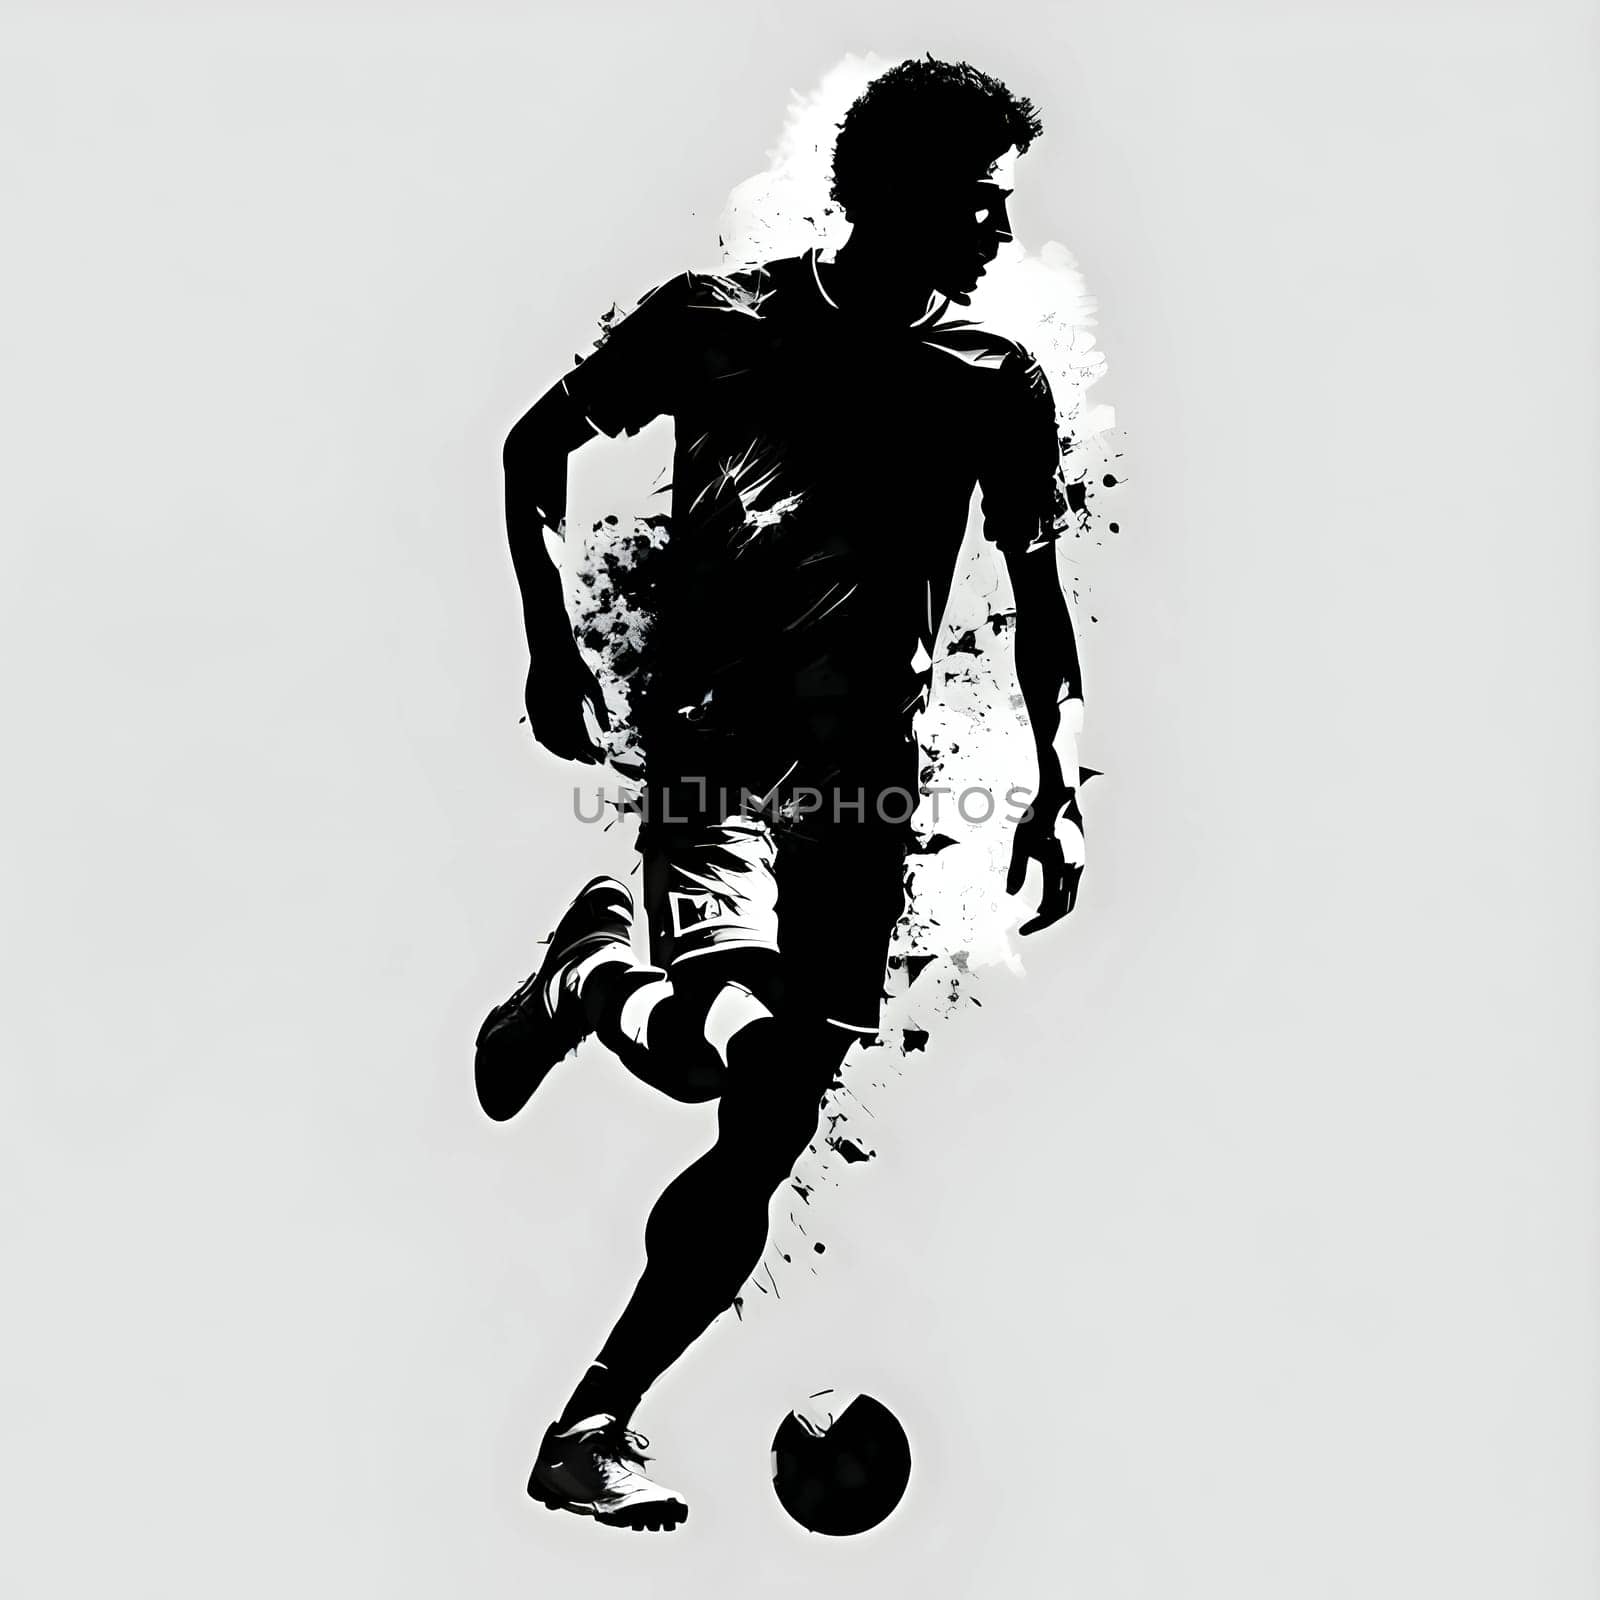 Vector illustration of a footballer in black silhouette against a clean white background, capturing graceful forms.